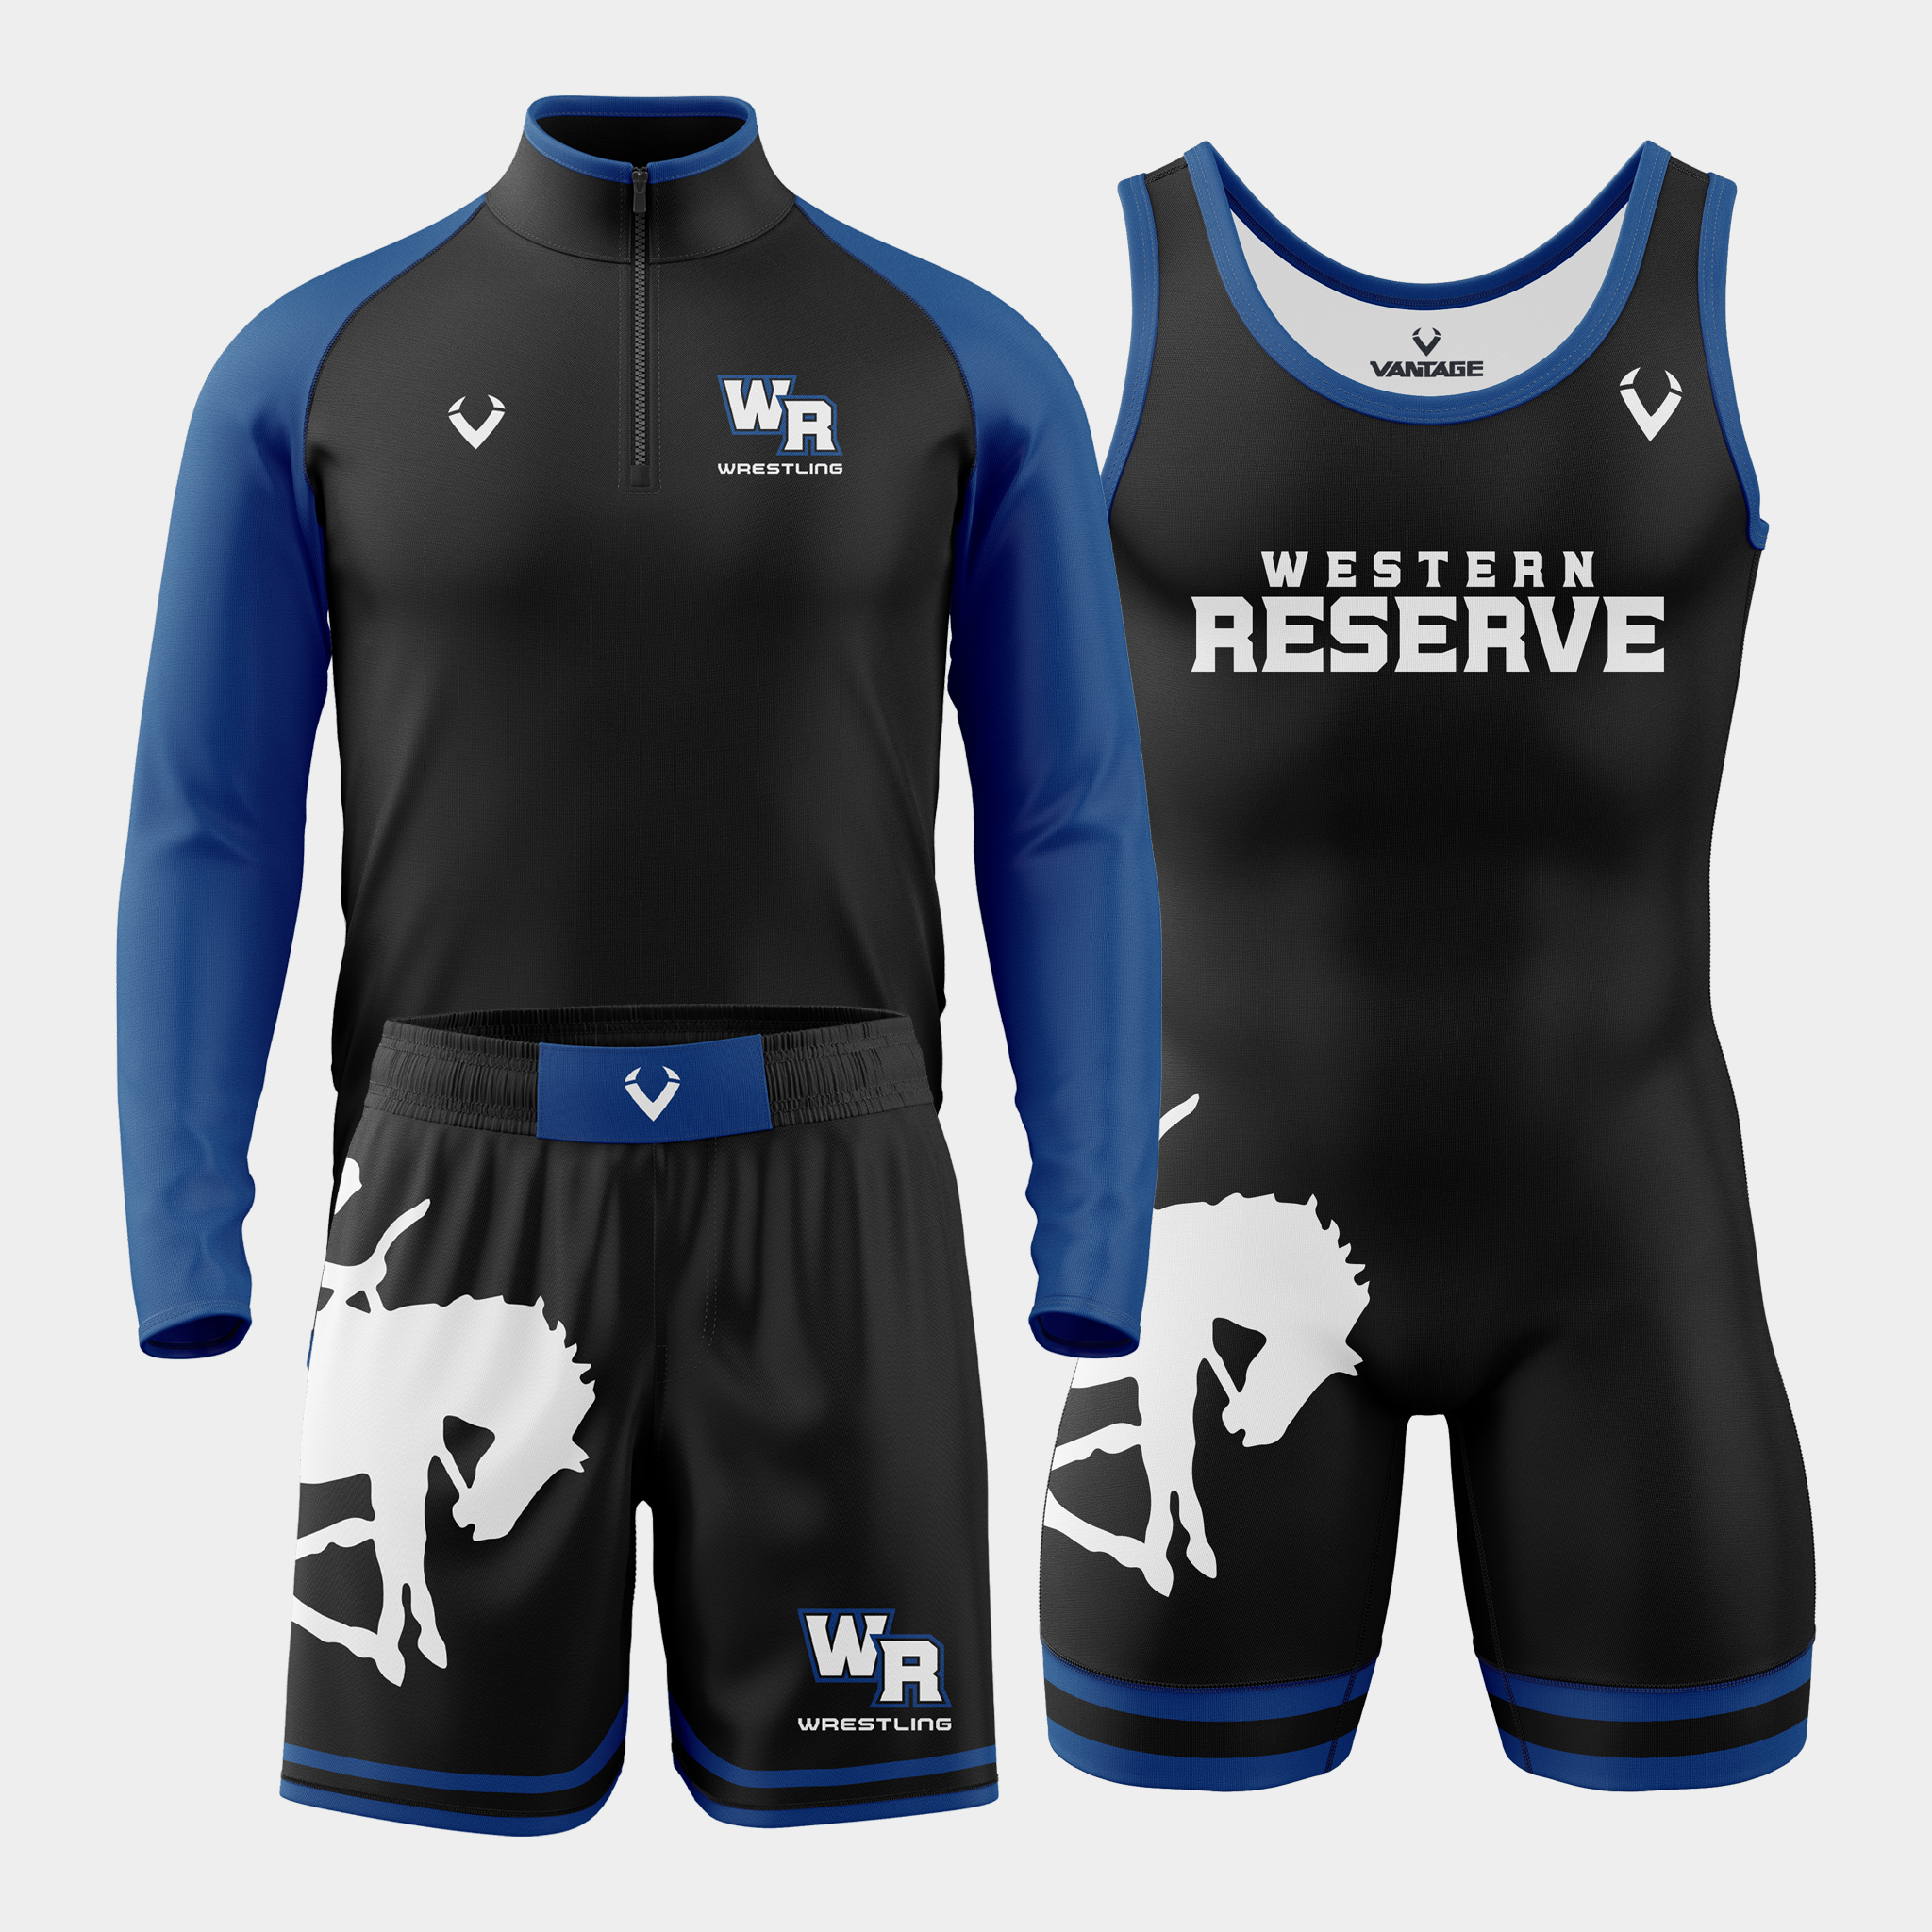 Western Reserve - Match Day Package